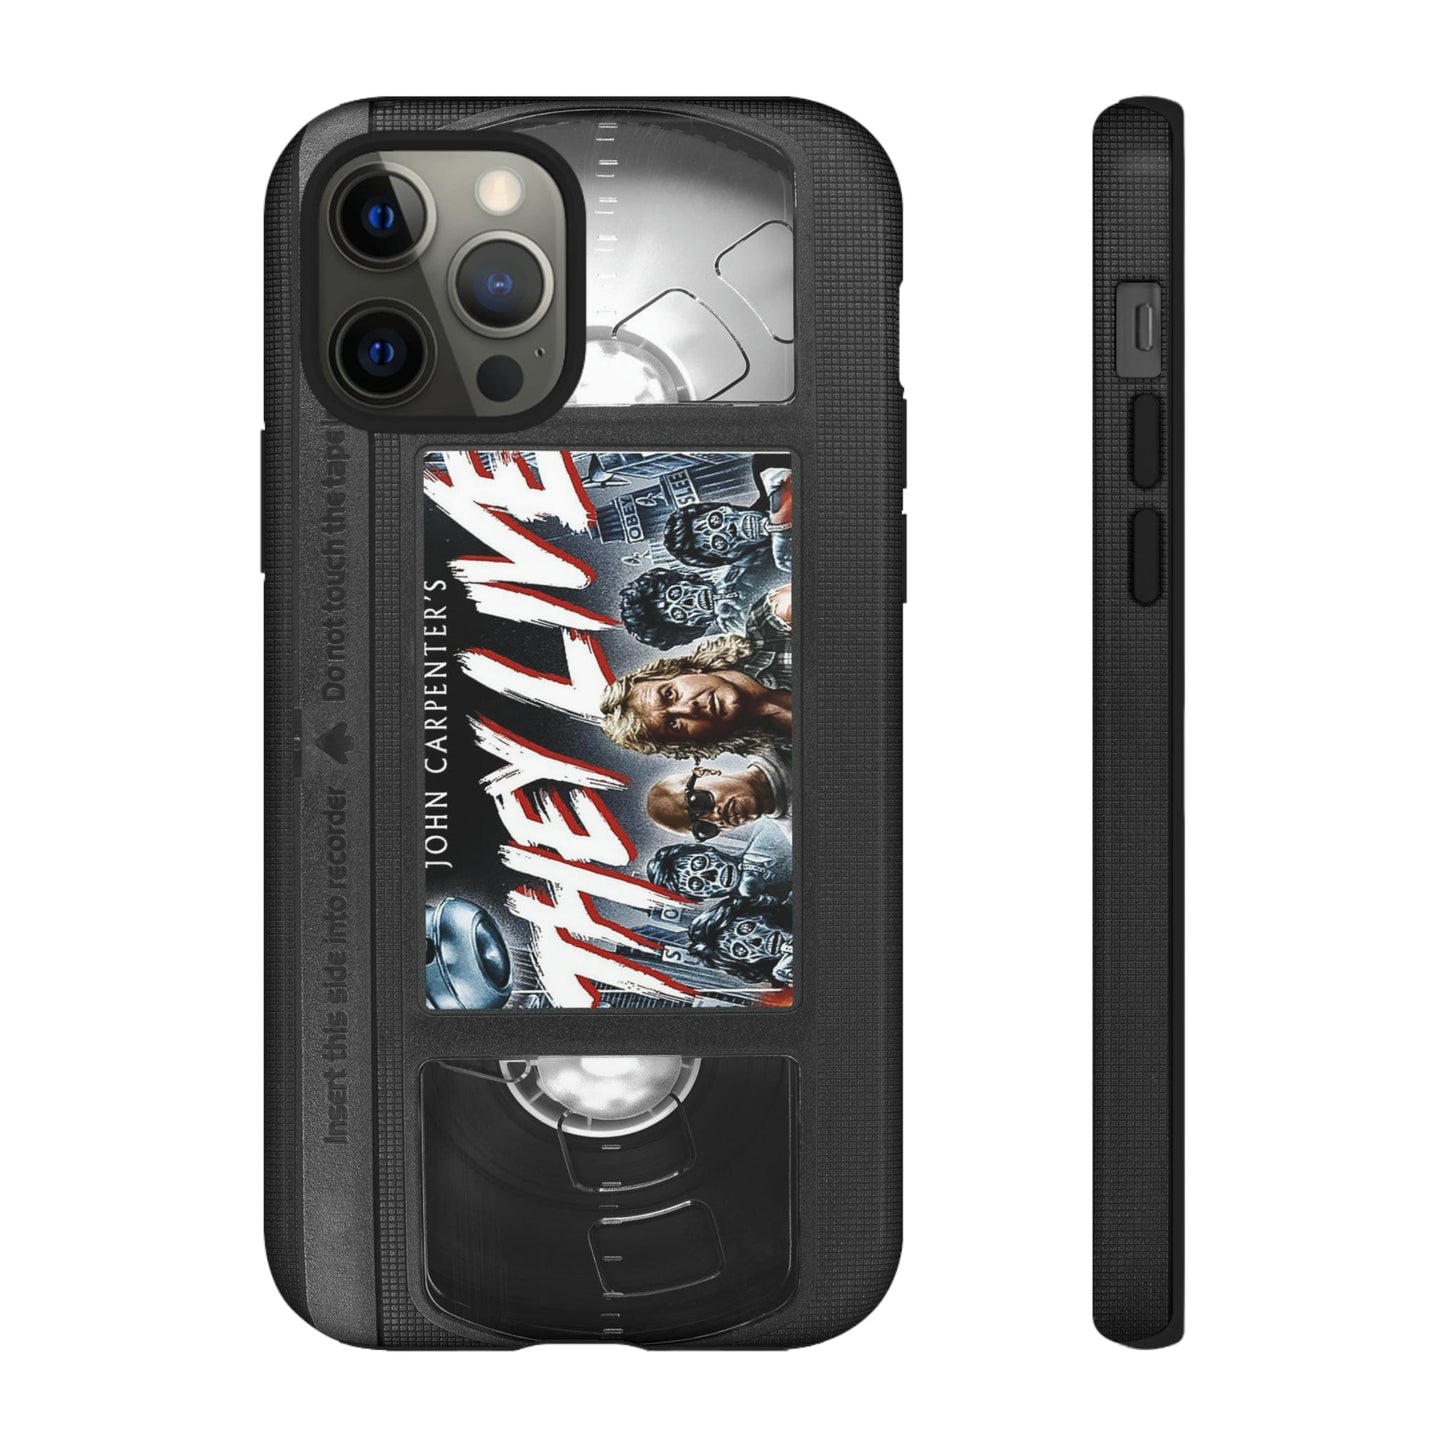 They Live Alternate Cover Impact Resistant VHS Phone Case